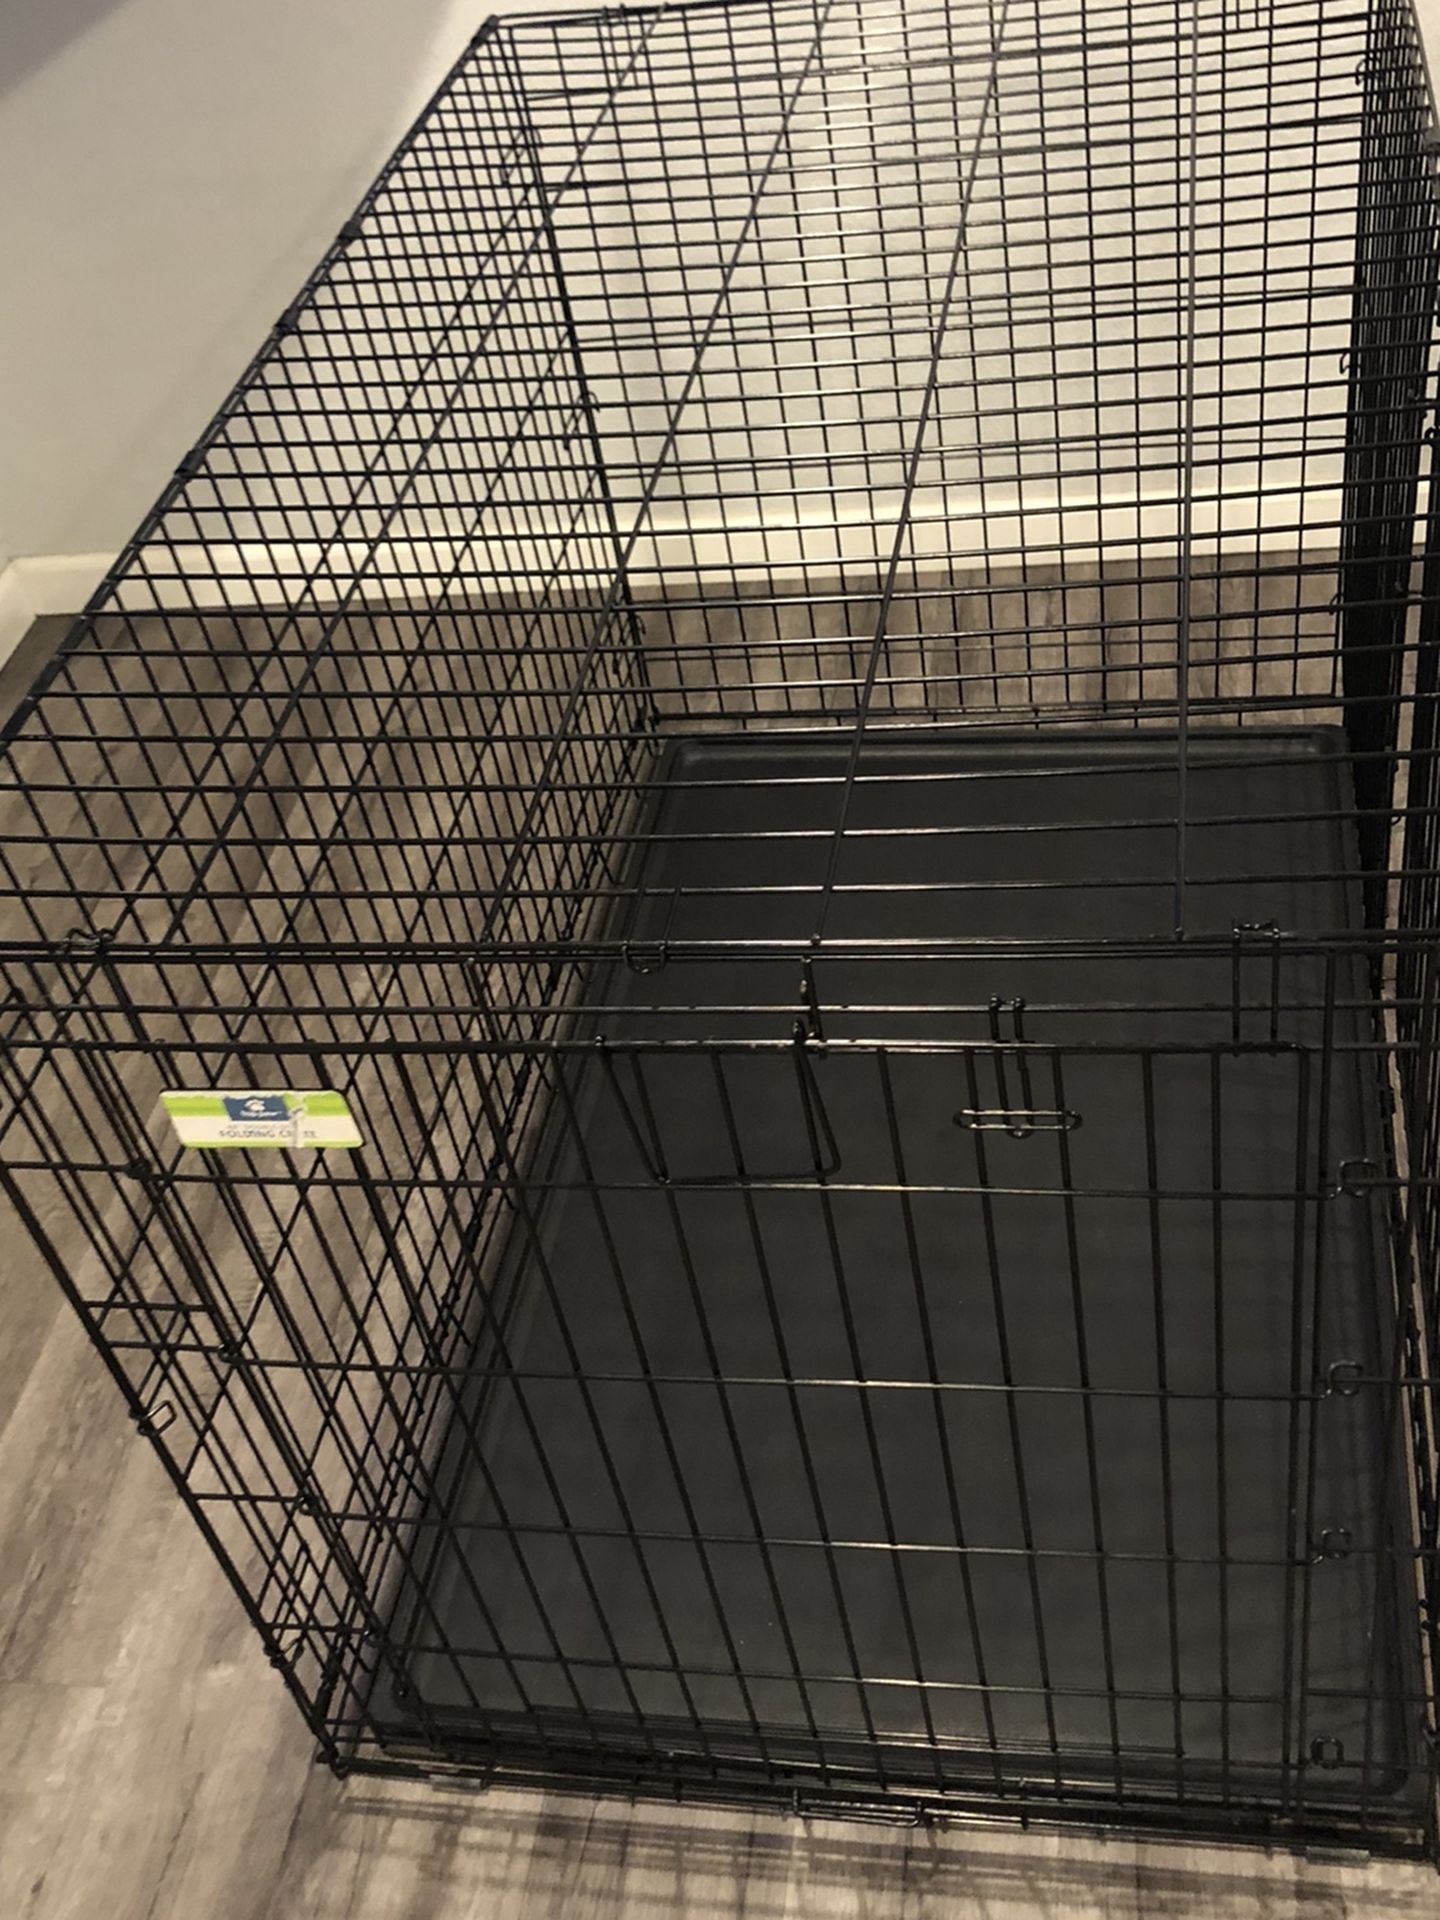 48” Dog Crate - indoor use only